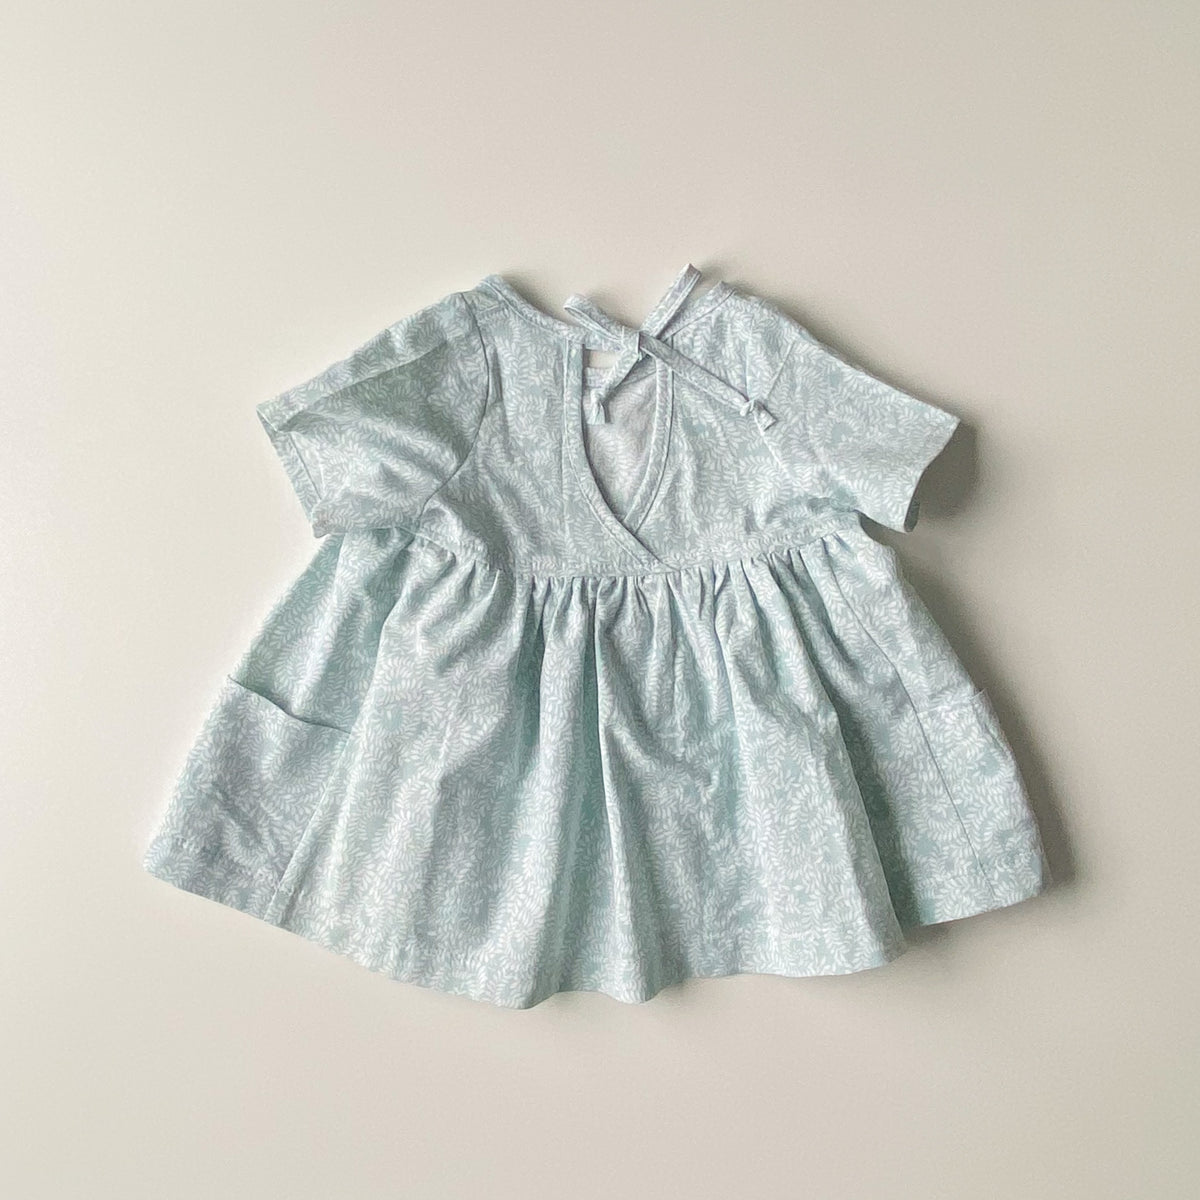 Nora Short-Sleeved Tunic with  Pockets in 'Reclaimed Sky Vines' - Ready To Ship